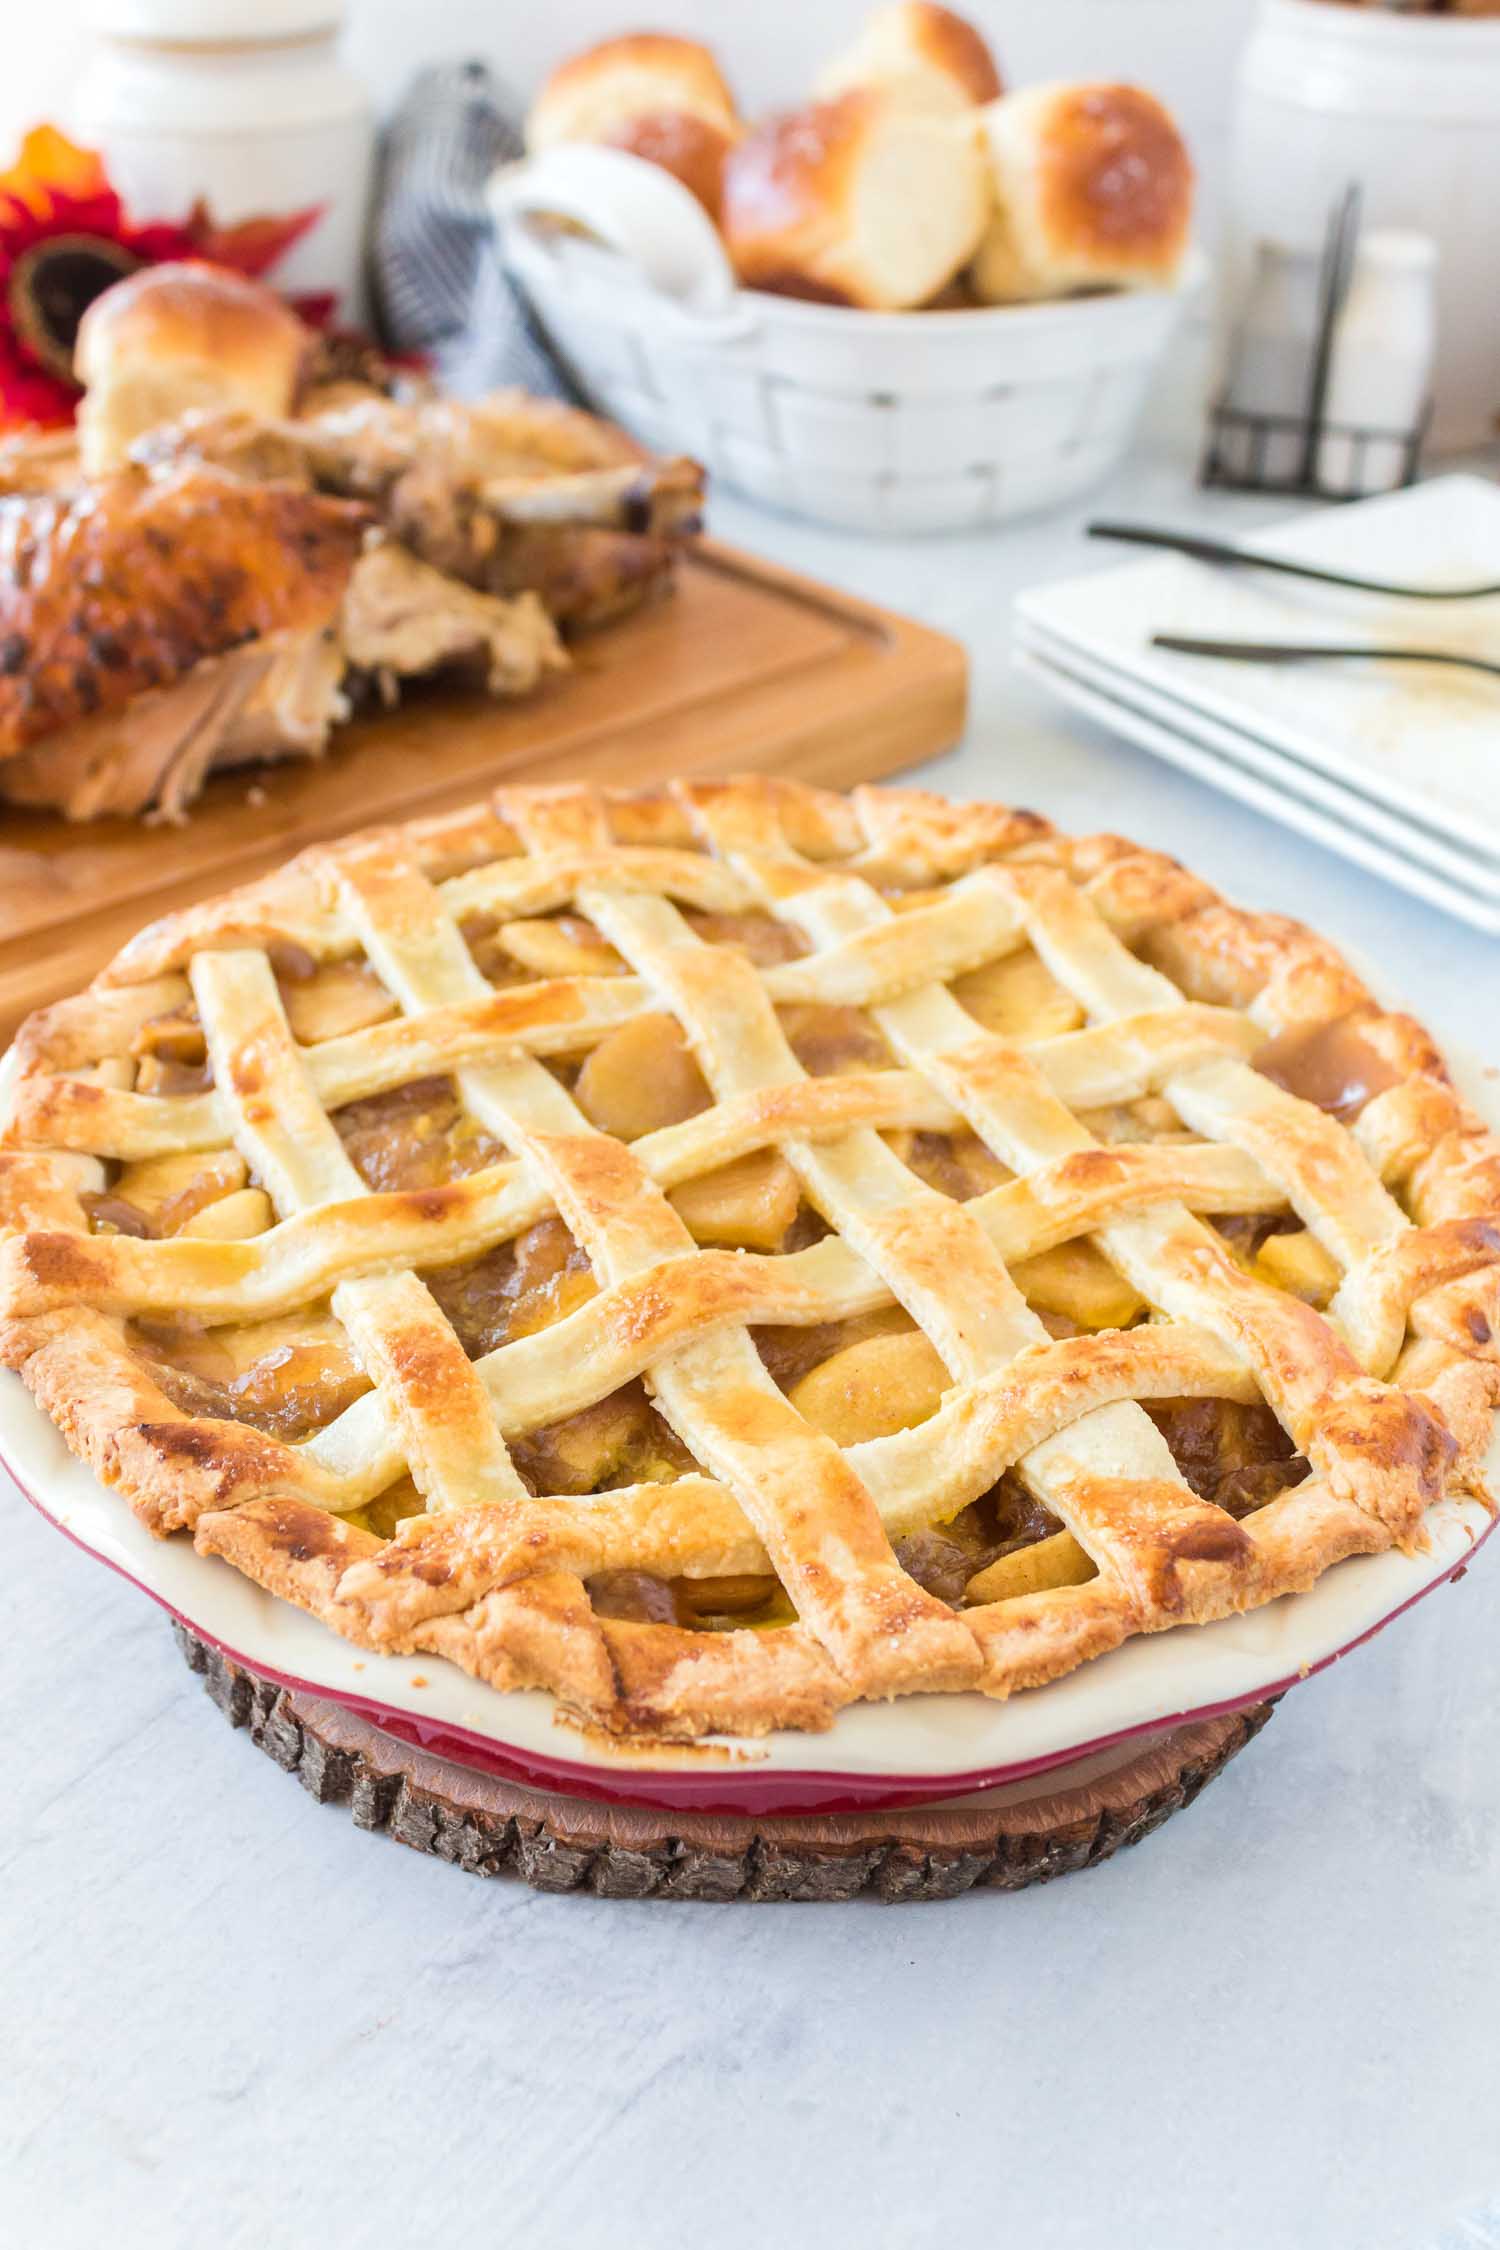 A whole homemade apple pie with turkey, rolls and plates in the background.